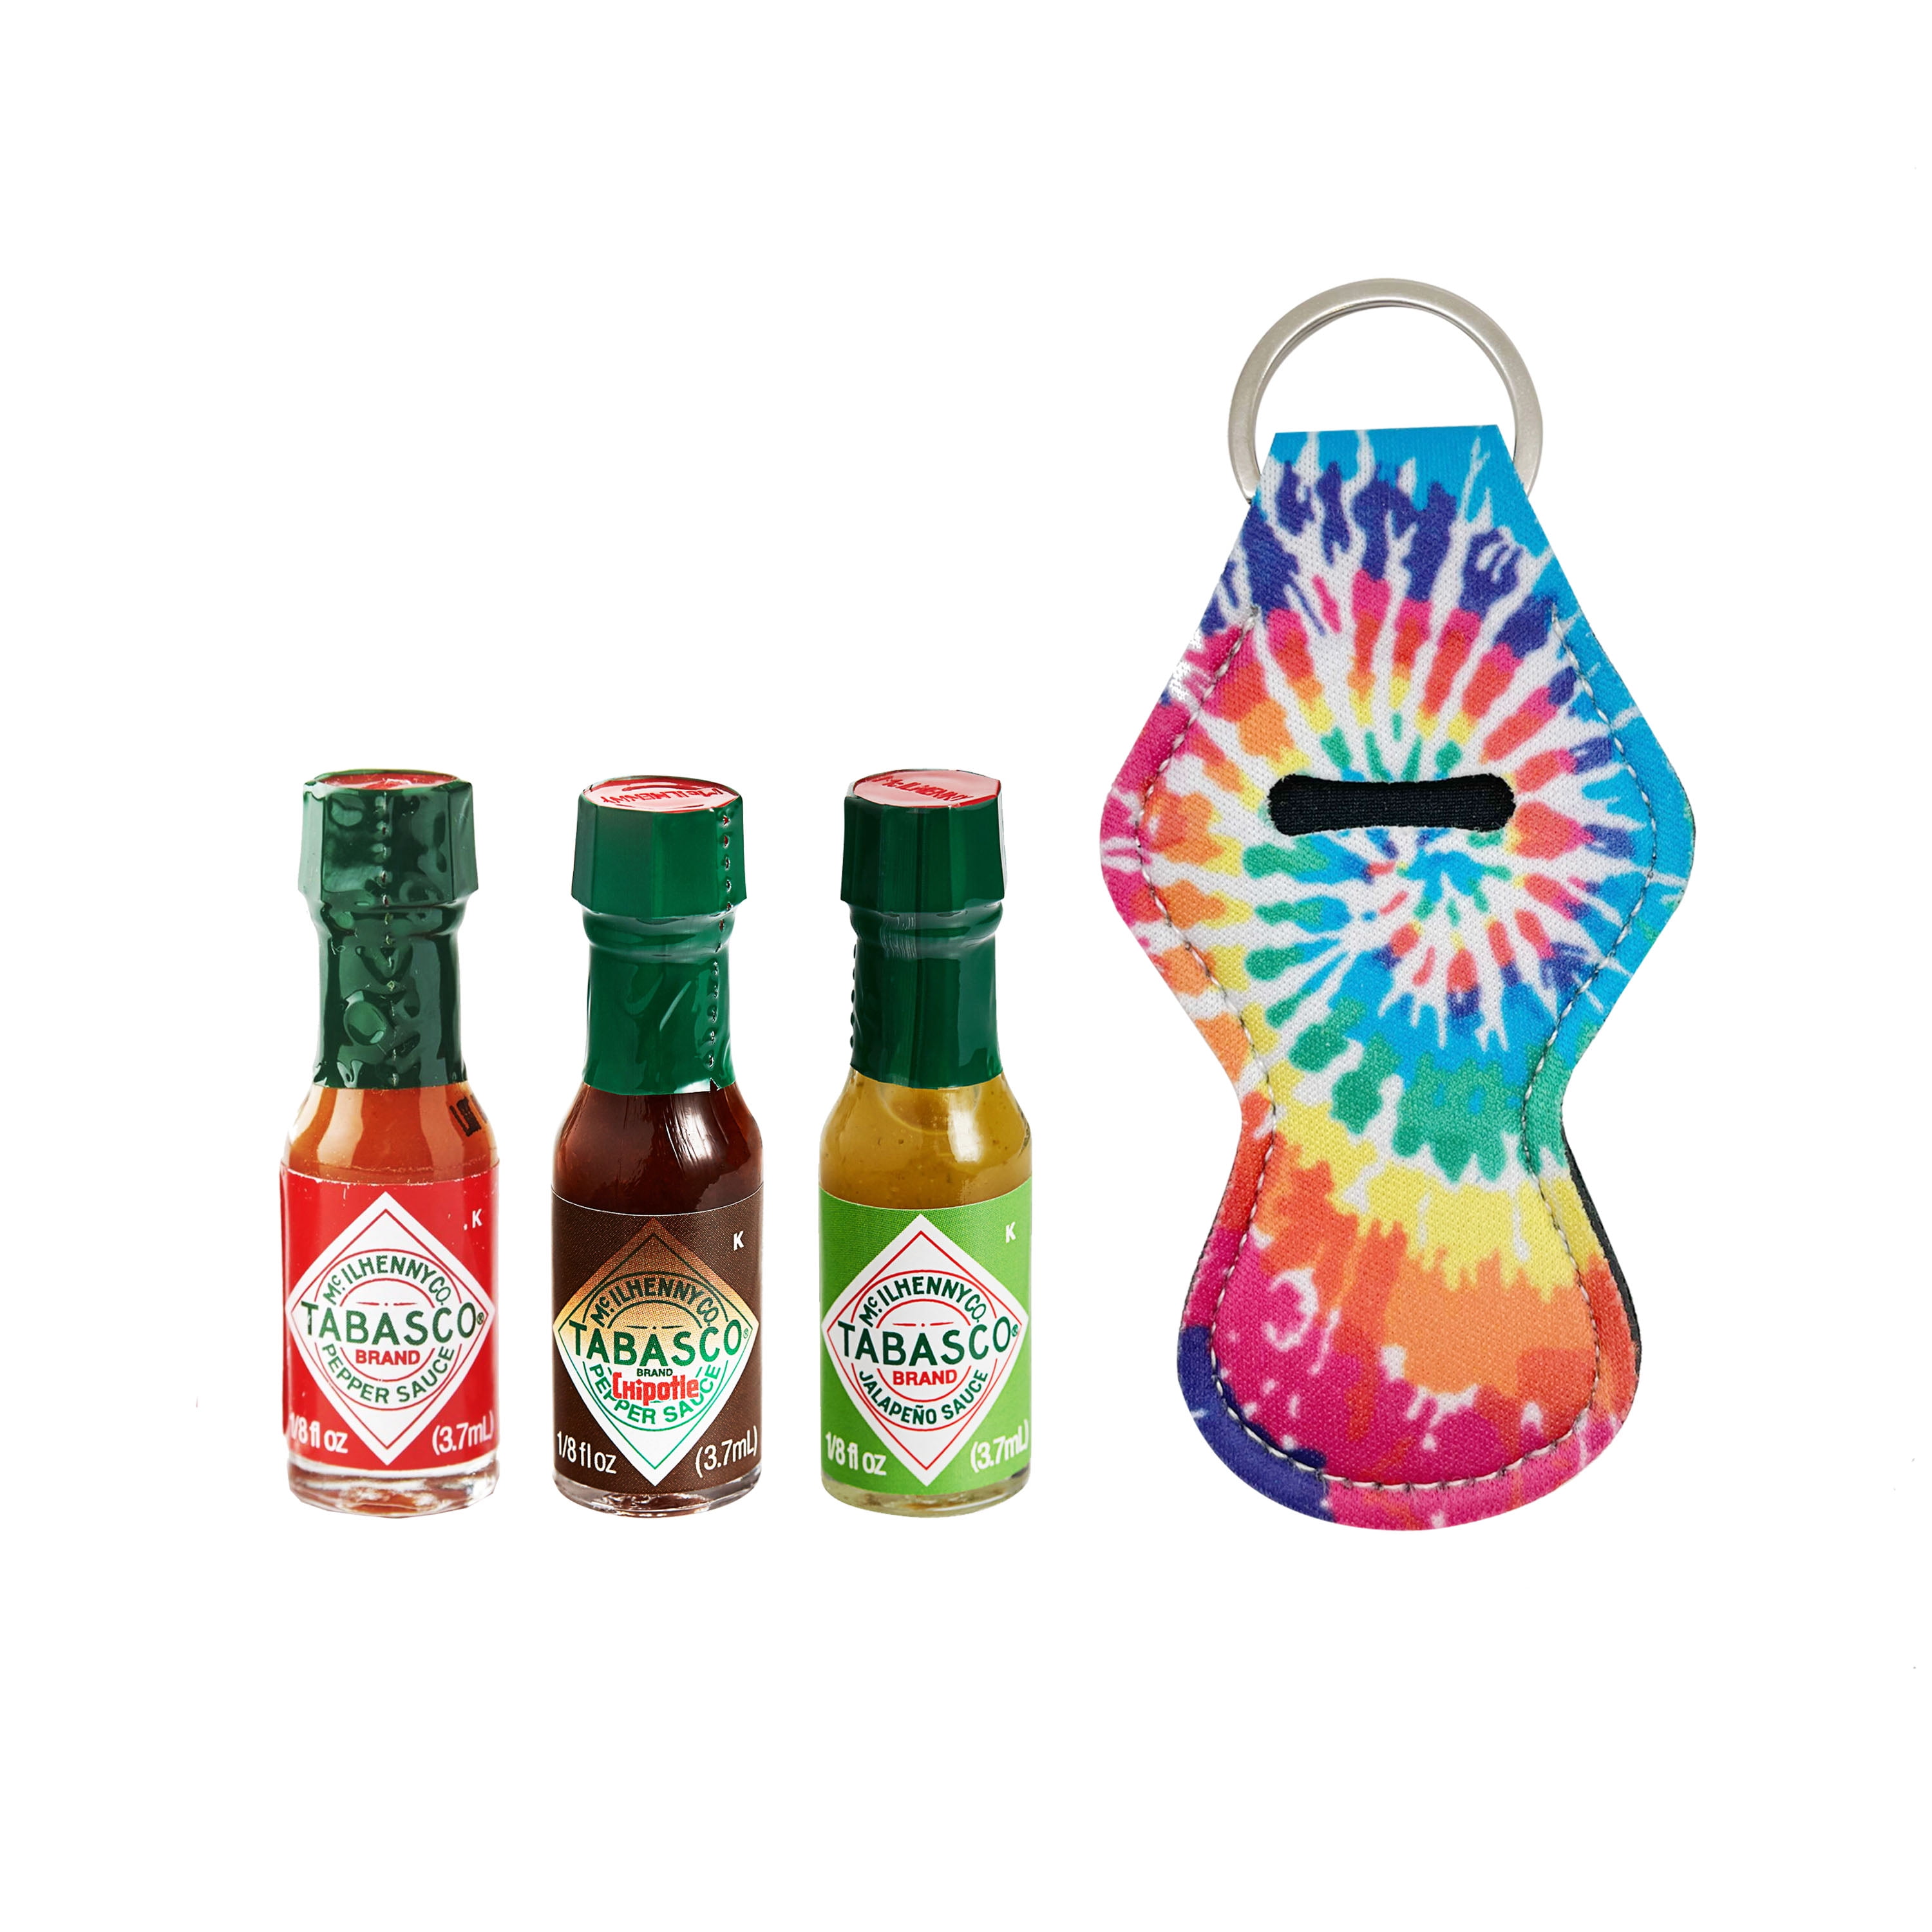 Tabasco Sauce Keychain Keyring Key Ring with FREE Mini 1/8 Oz Bottle of  Original Hot Sauce Perfect for Pocket, Purse, or Travel - Miami Hat Shop